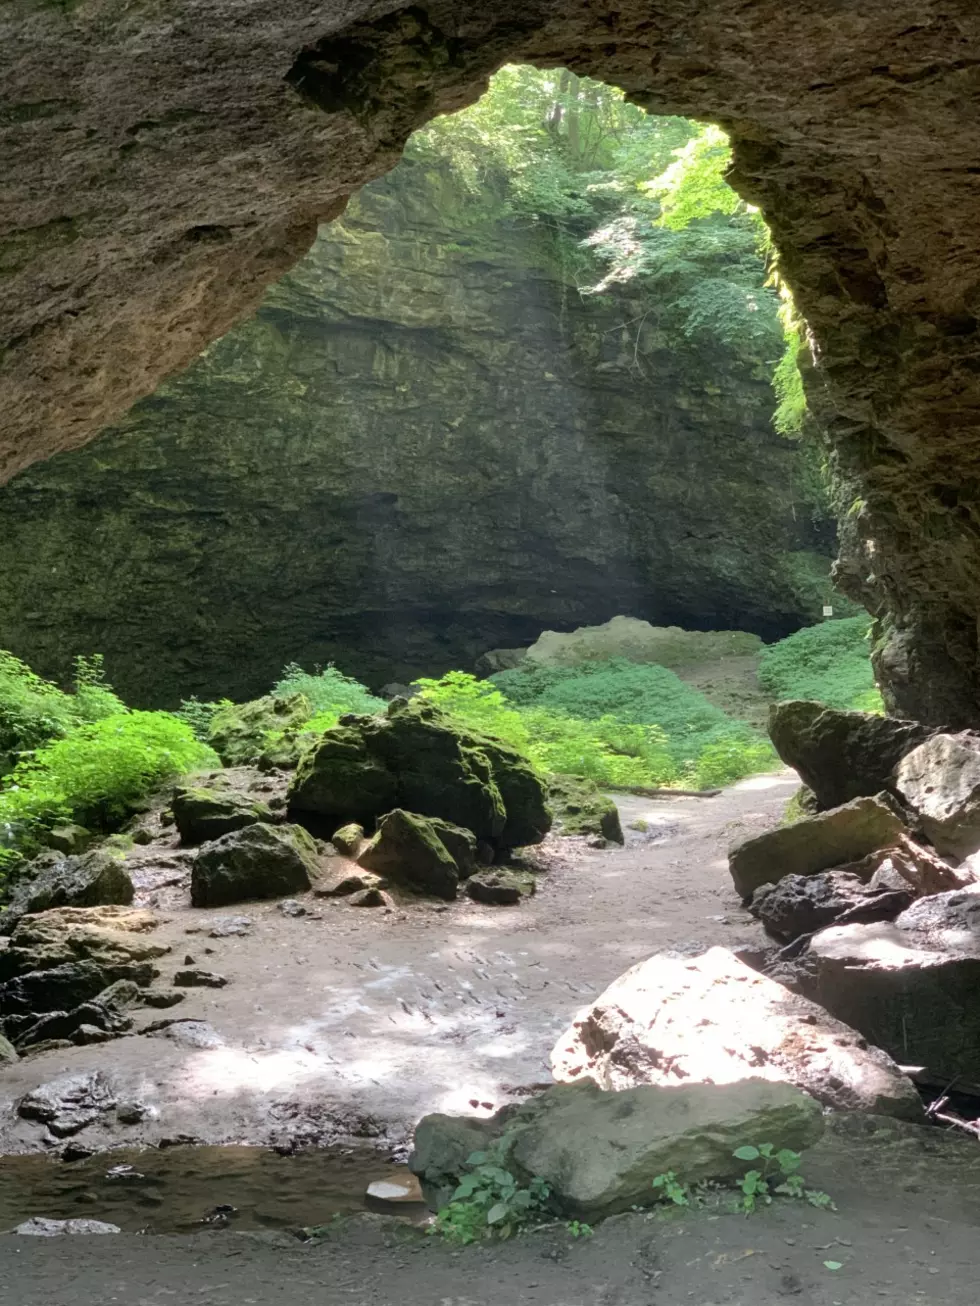 Johnny Marks – My Weekend in 5 Photos Maquoketa Caves